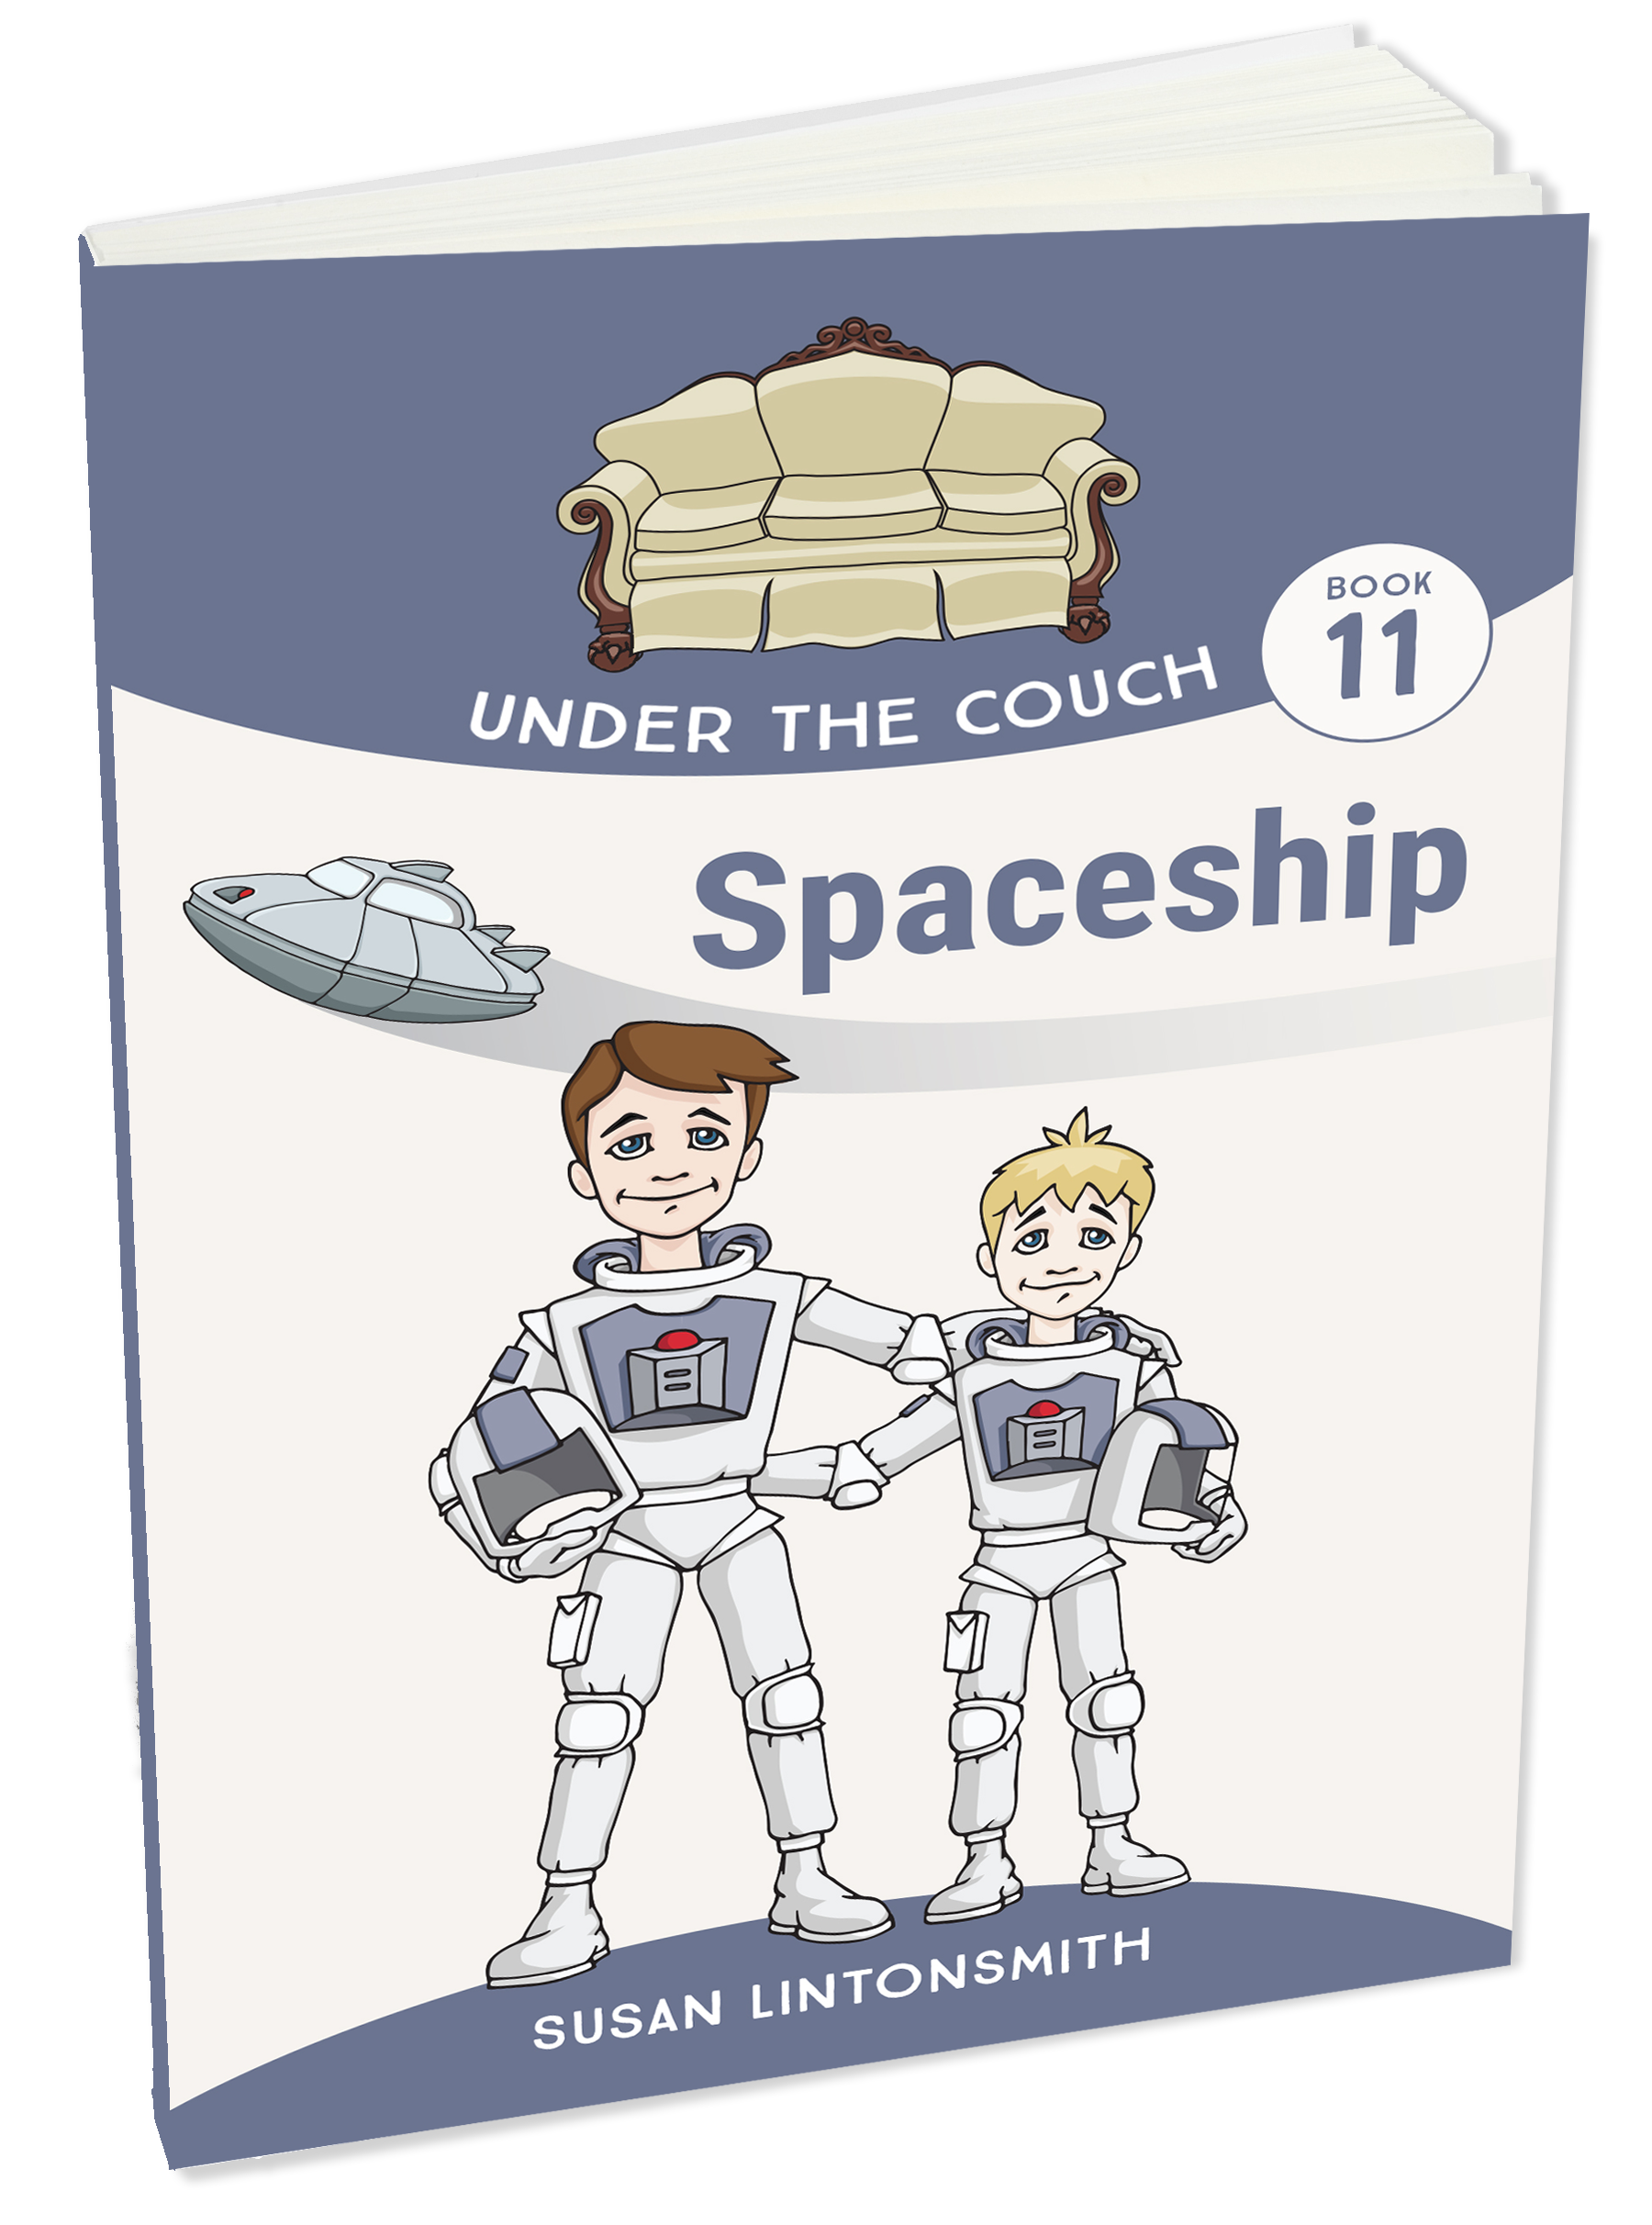 under the couch book 11 spaceship susan lintonsmith